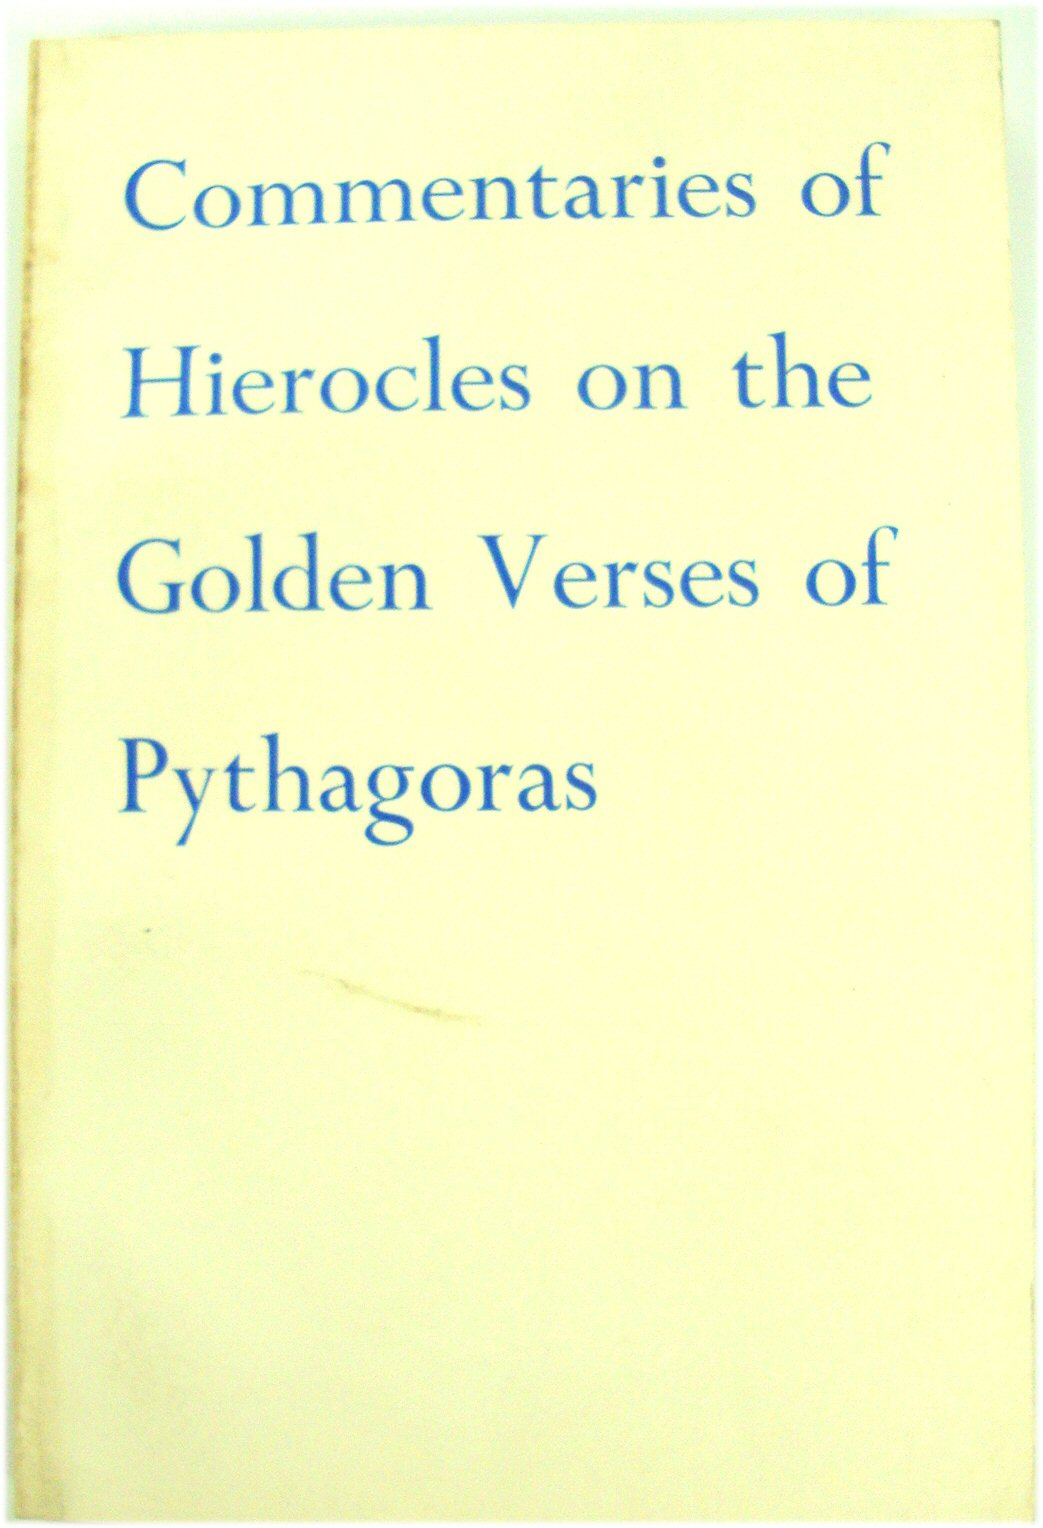 Commentaries of Hierocles on the Golden Verses of Pythagoras - Rowe, N. (trans.)